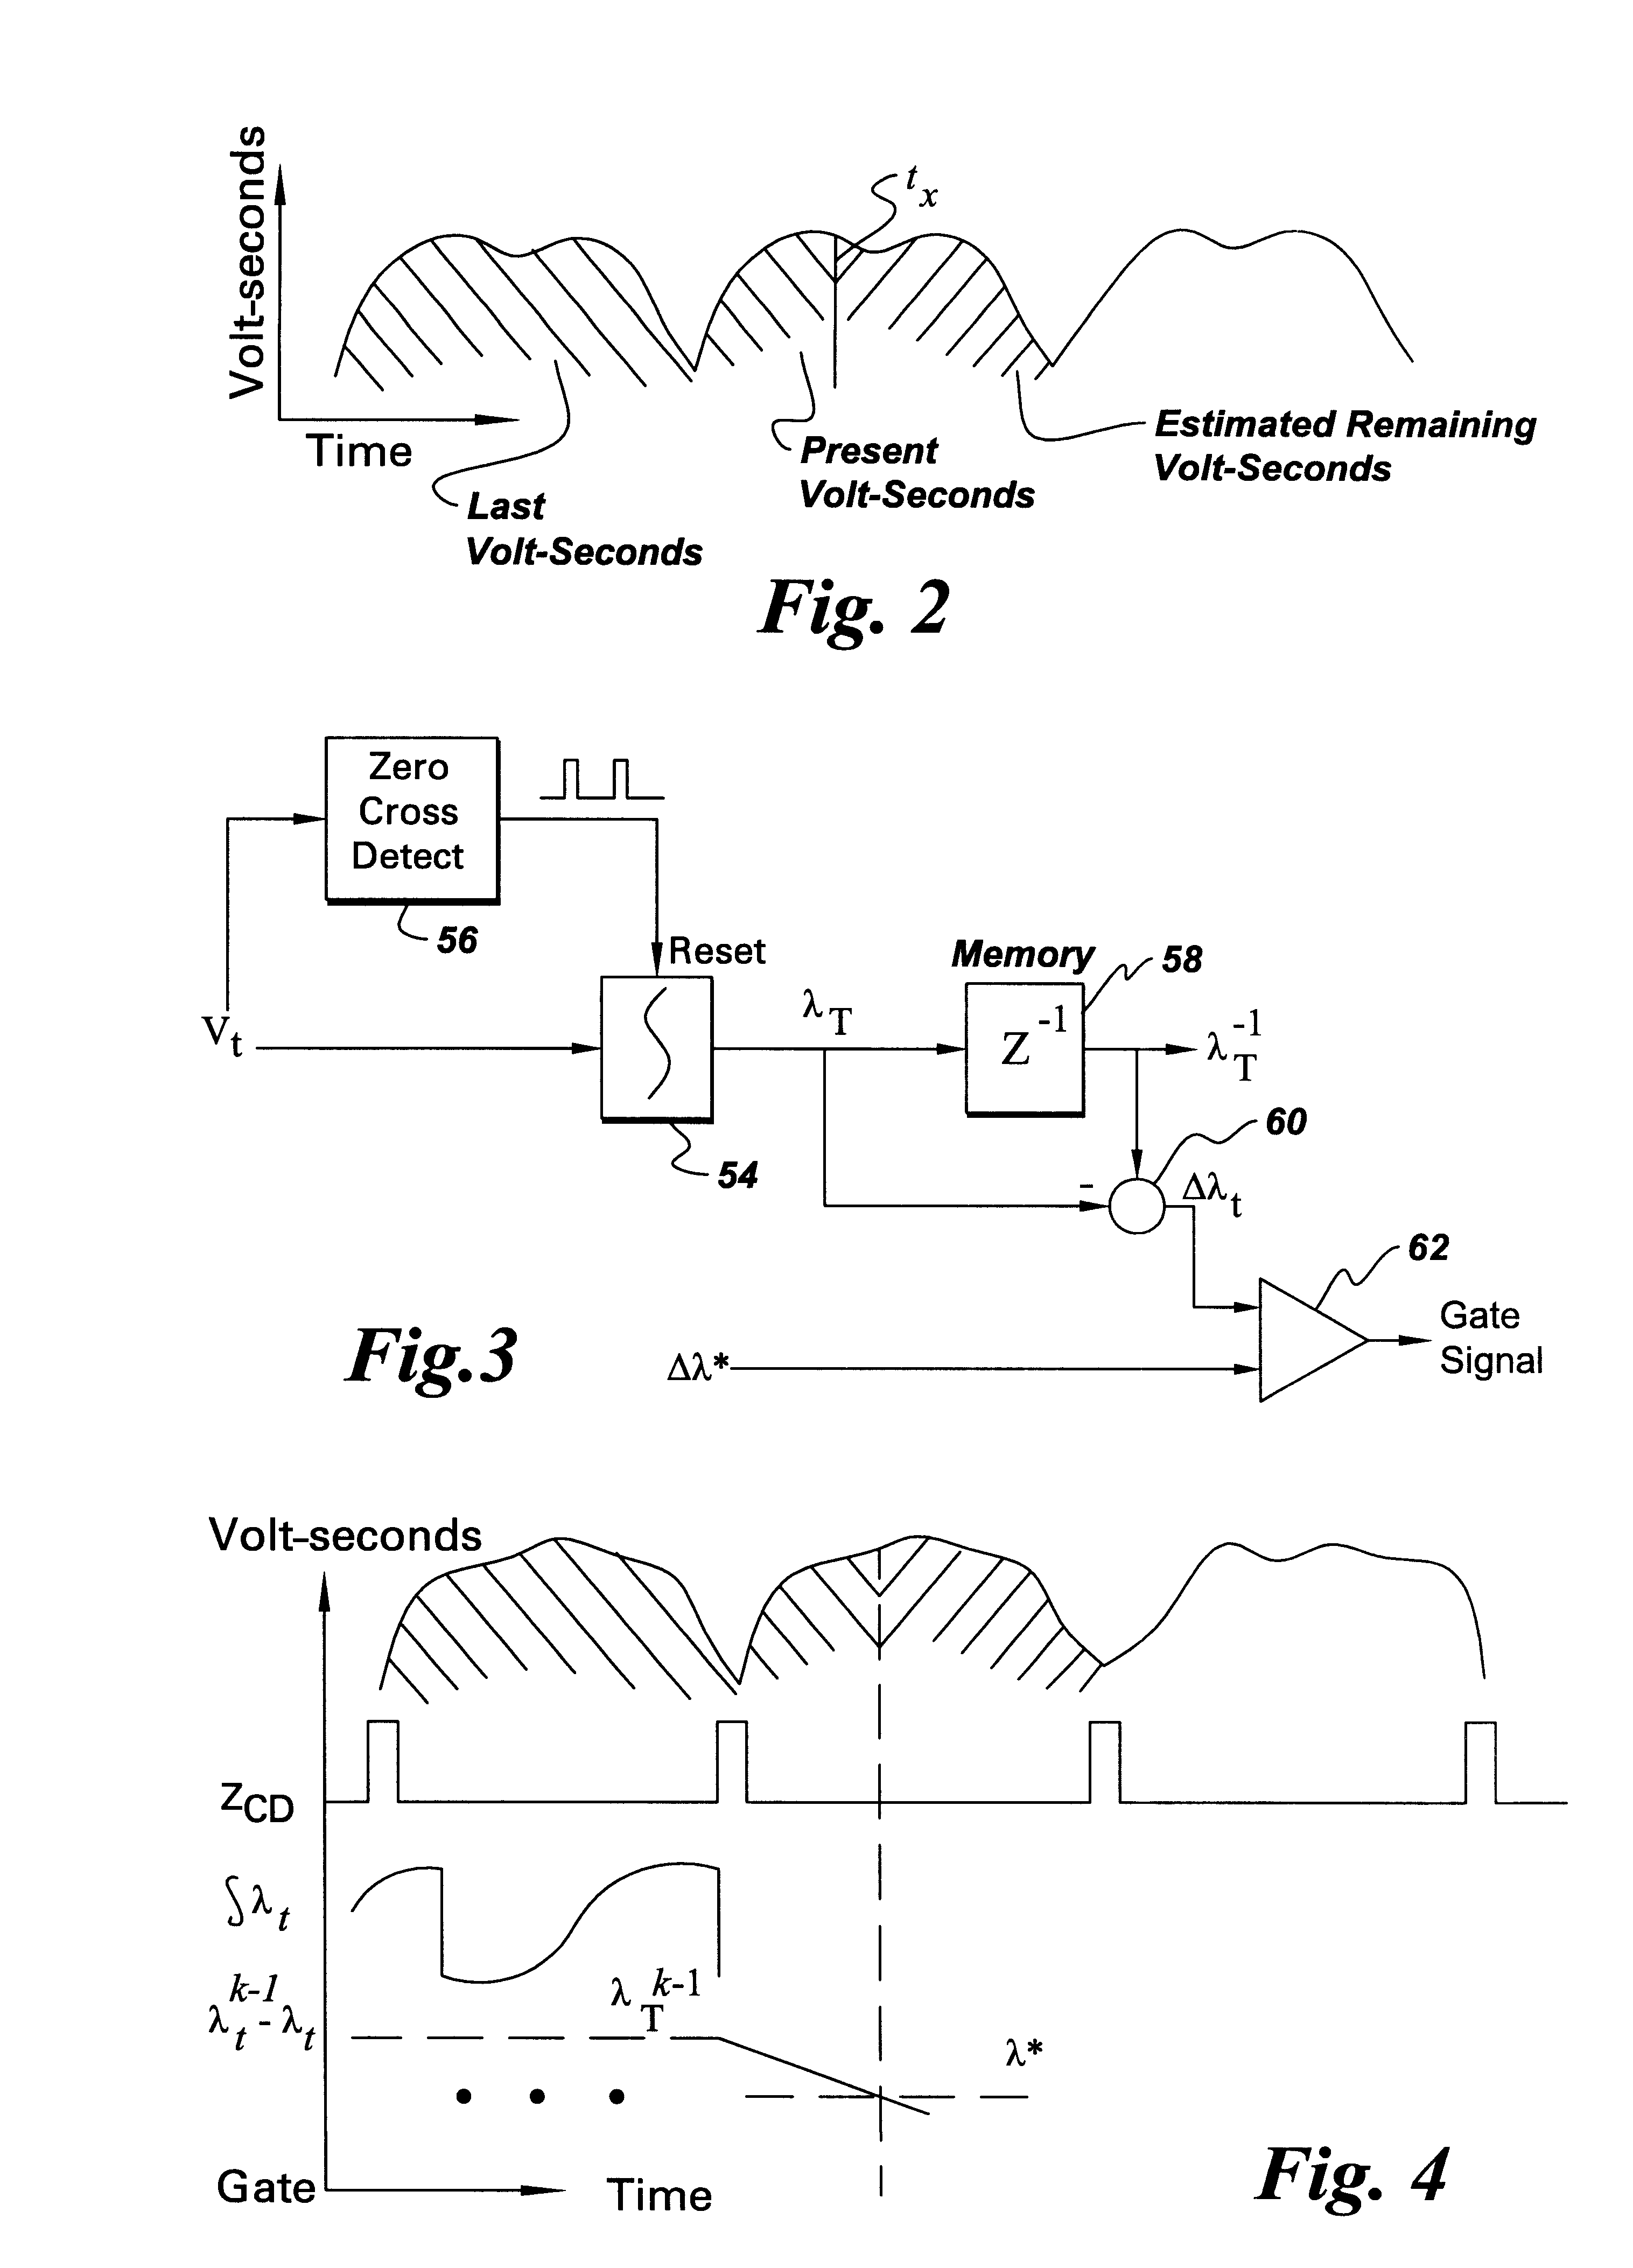 Wound field synchronous machine control system and method